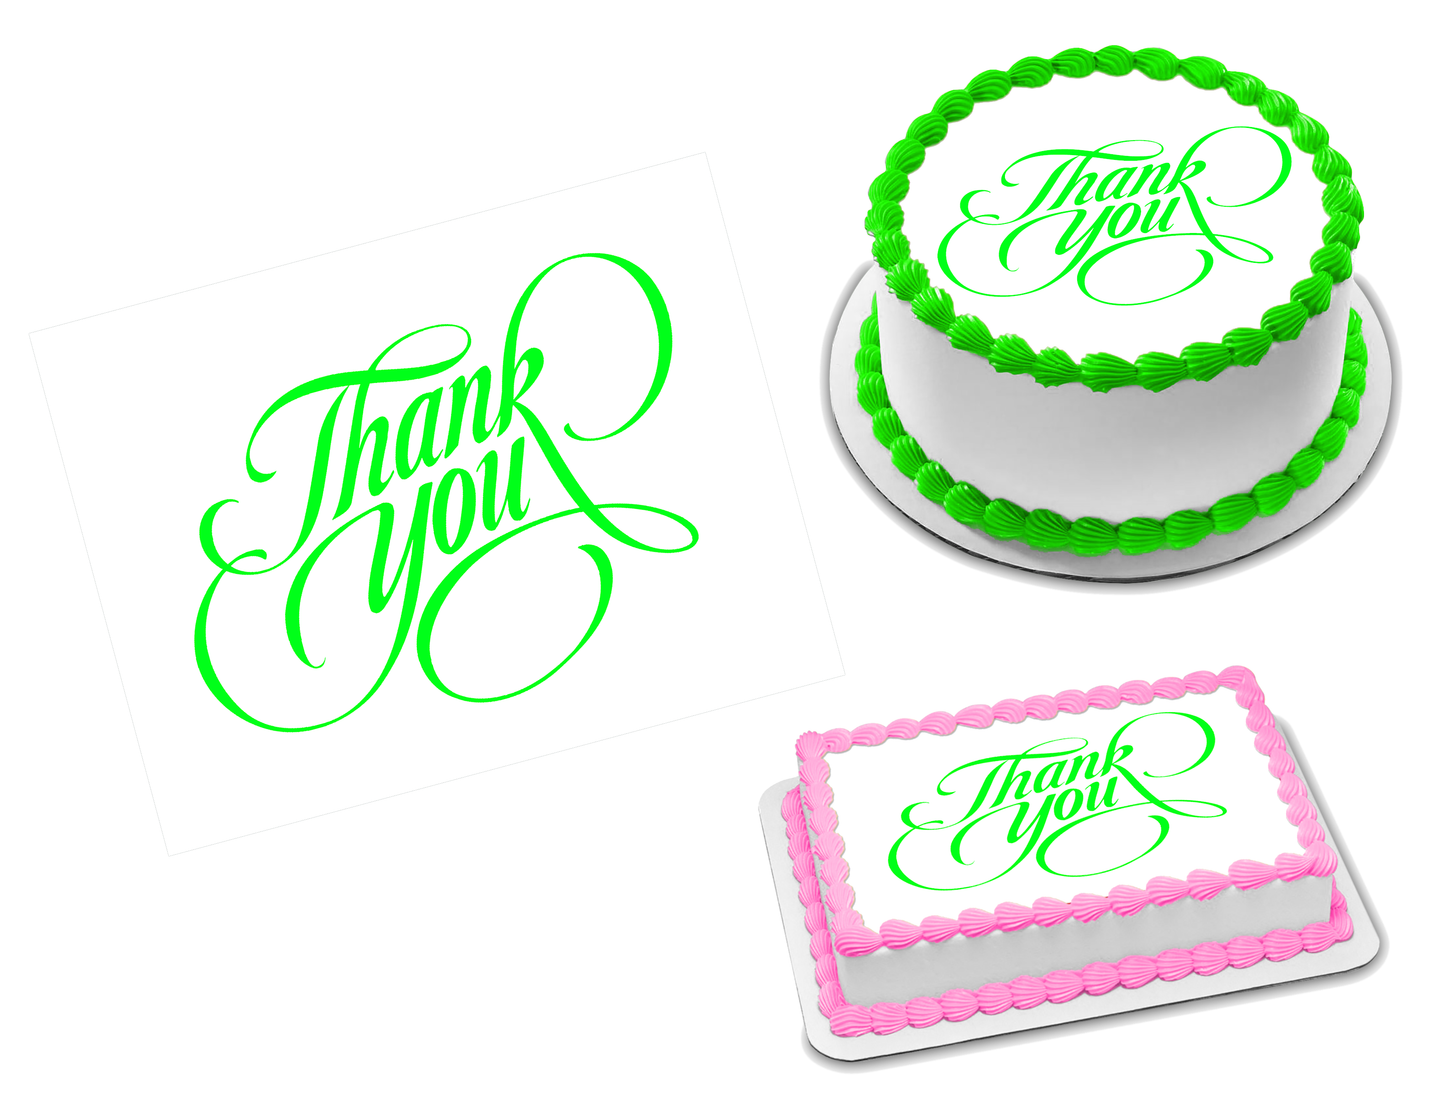 Thank You Calligraphy Lime Green Edible Image Frosting Sheet #3 (70+ sizes)